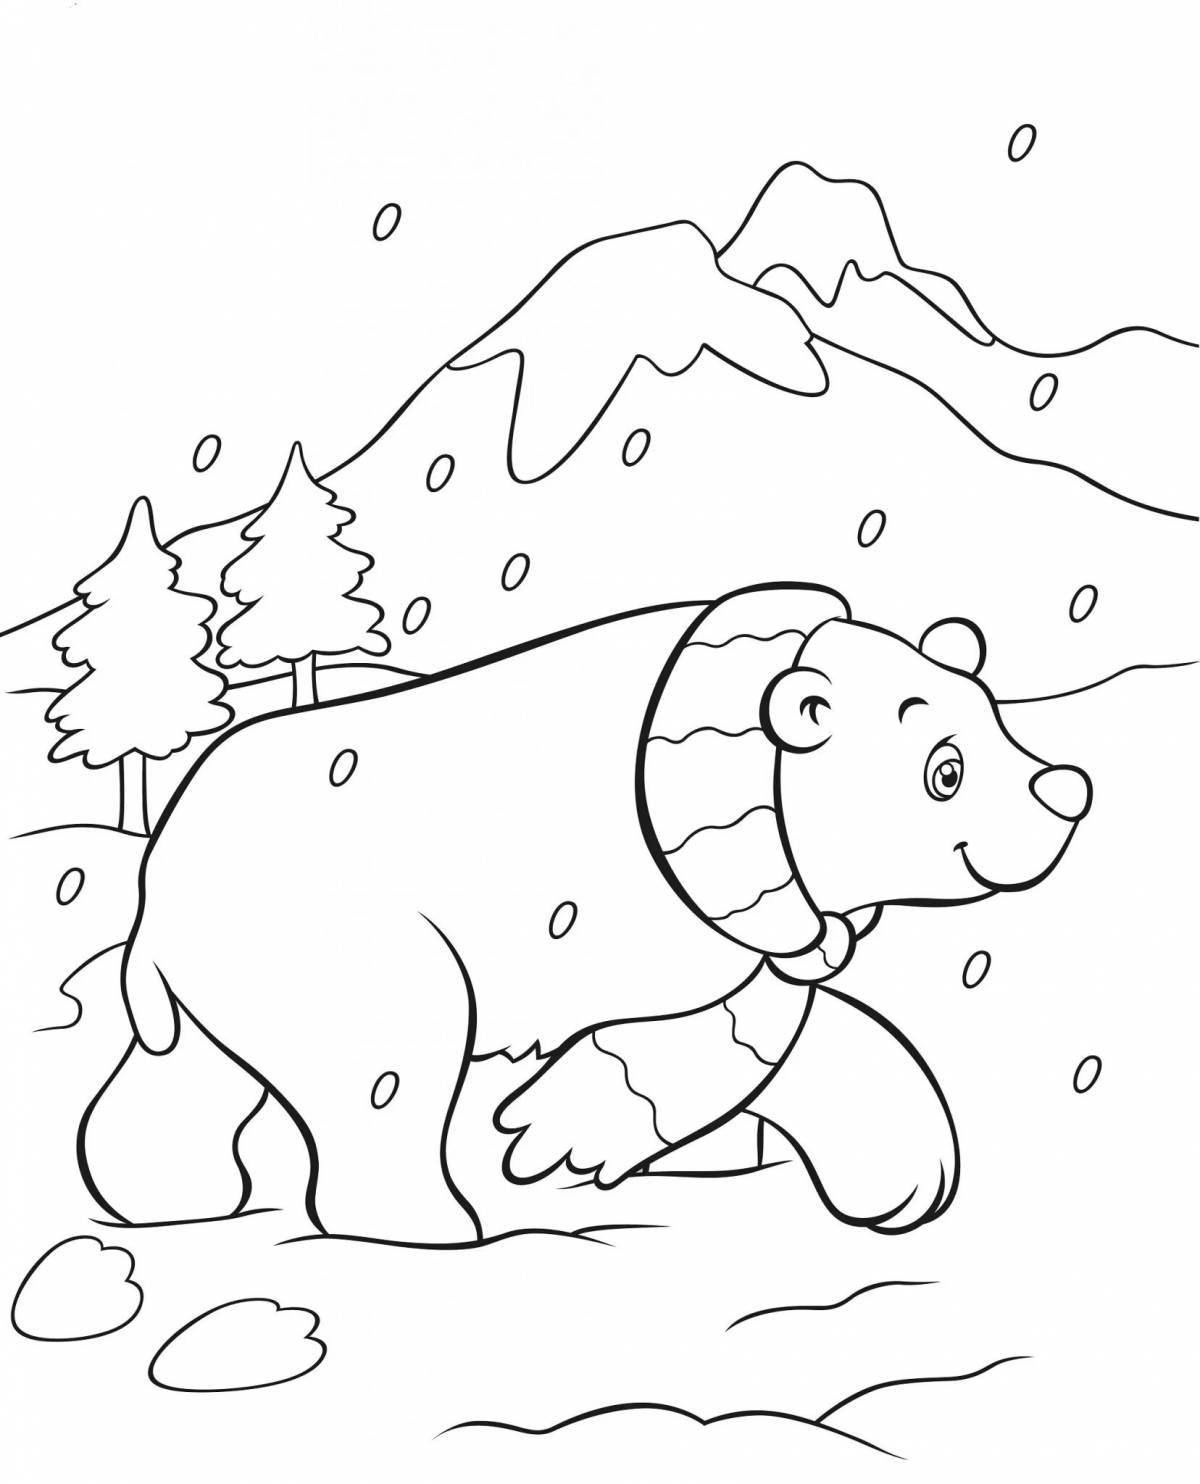 Coloring dreamy northern bear